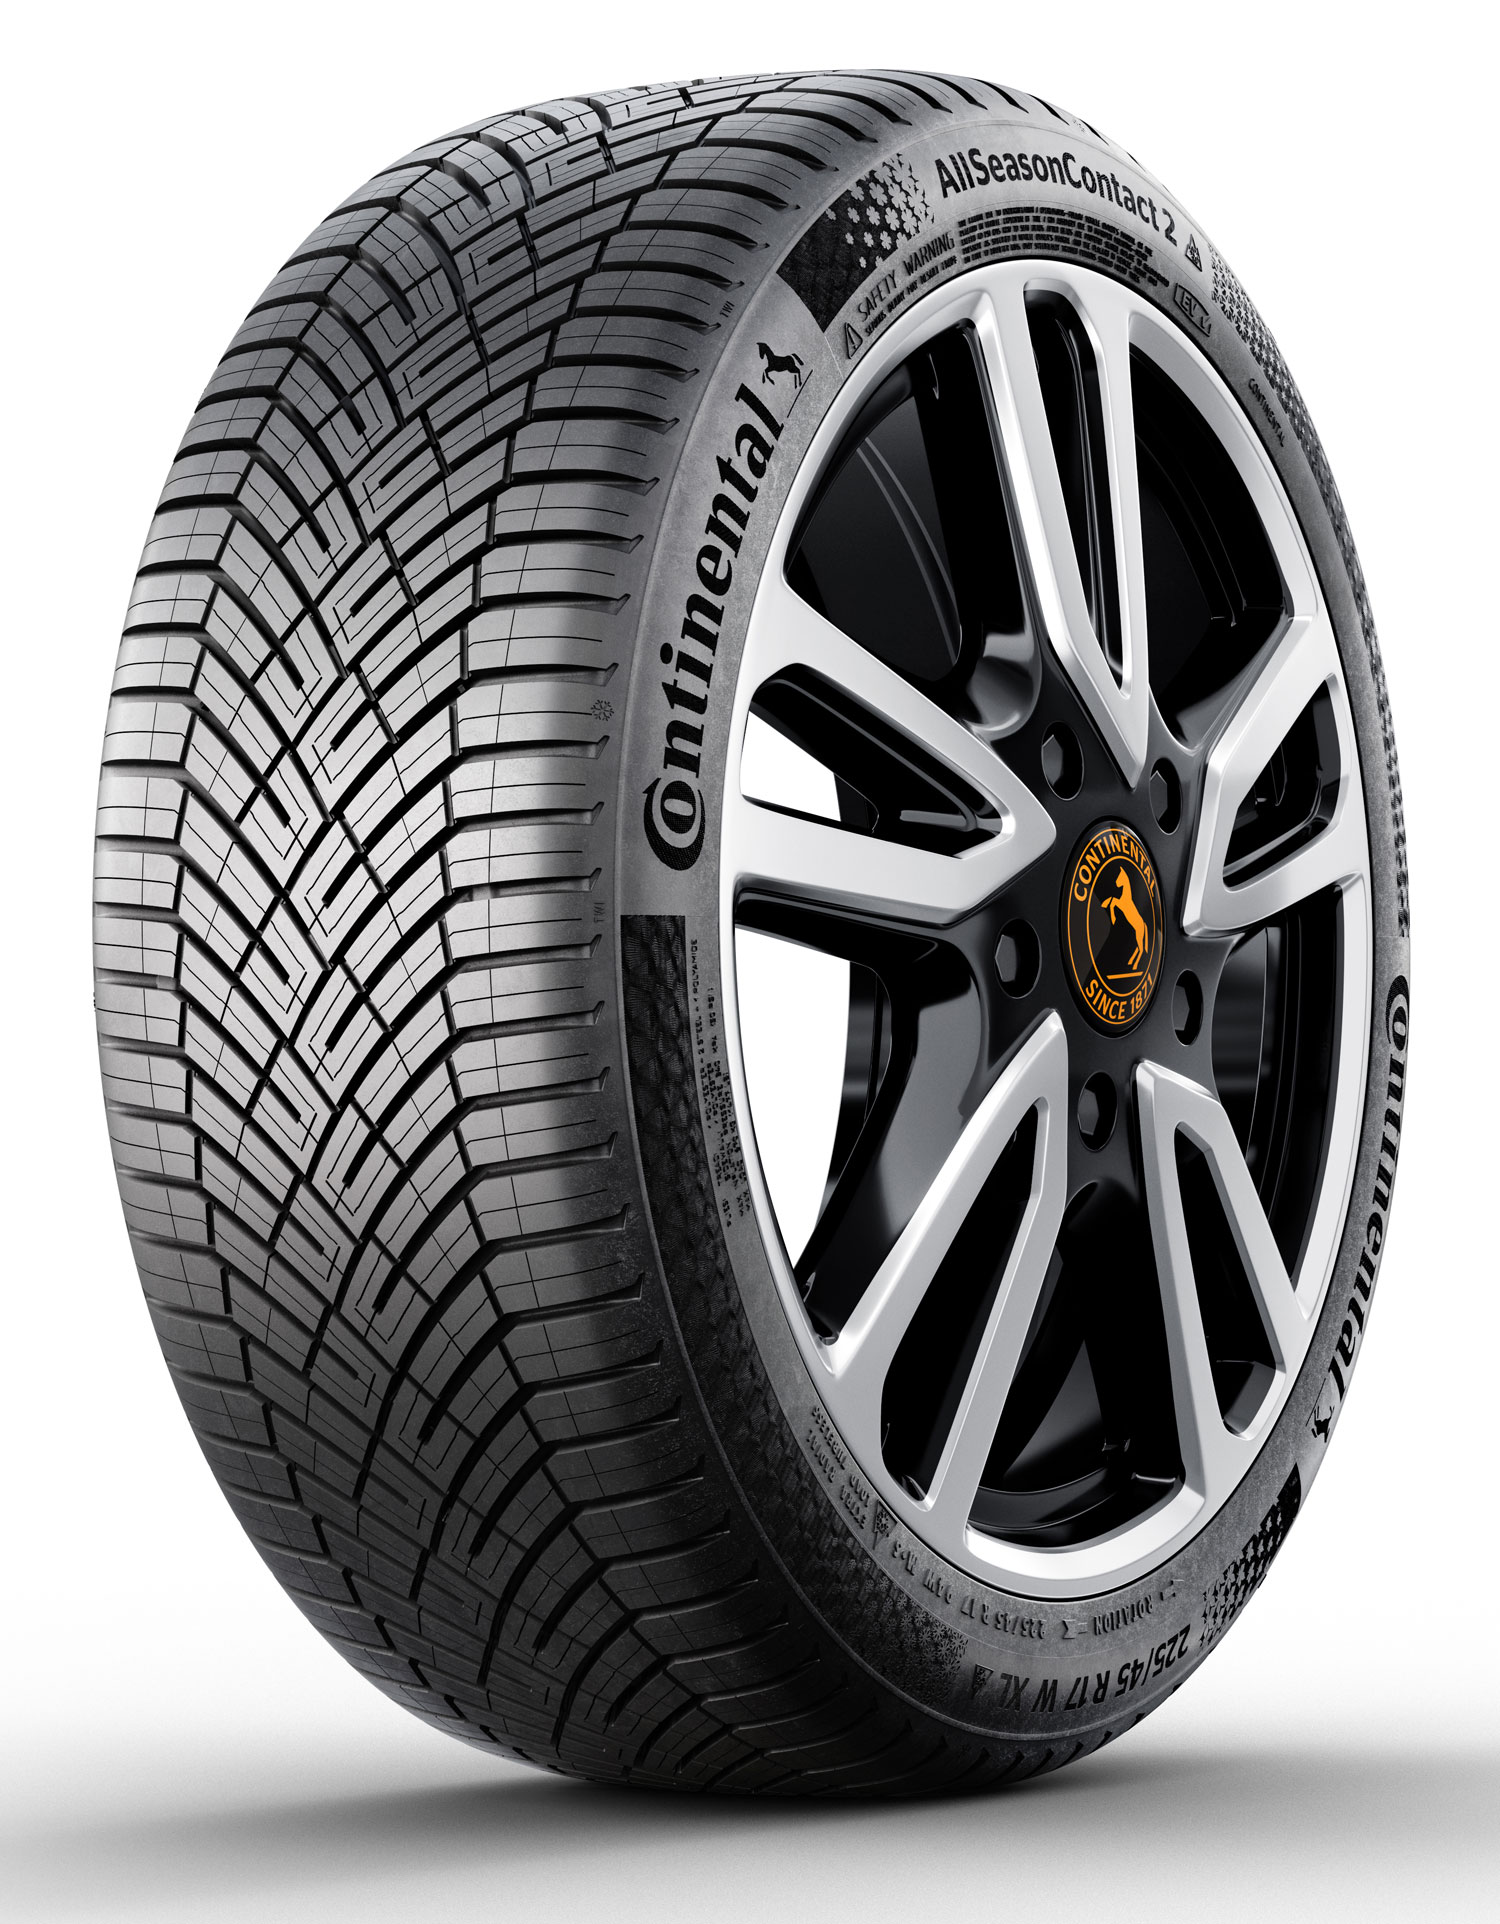 Gomme Nuove Continental 215/55 R16 97V ALLSEASONS CONTACT 2 XL M+S pneumatici nuovi All Season